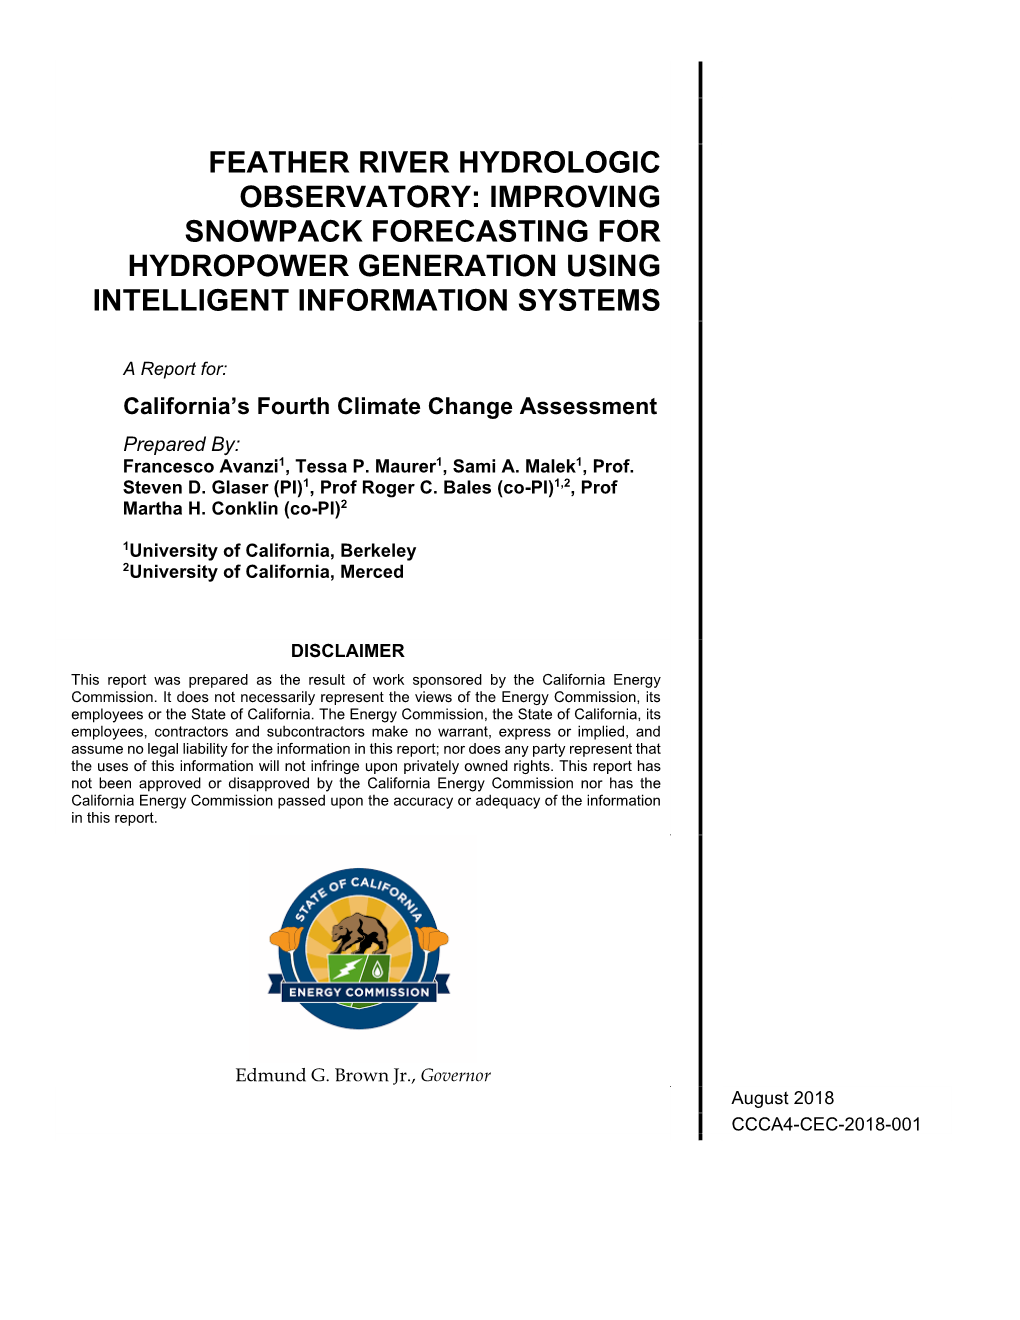 Feather River Hydrologic Observatory: Improving Snowpack Forecasting for Hydropower Generation Using Intelligent Information Systems